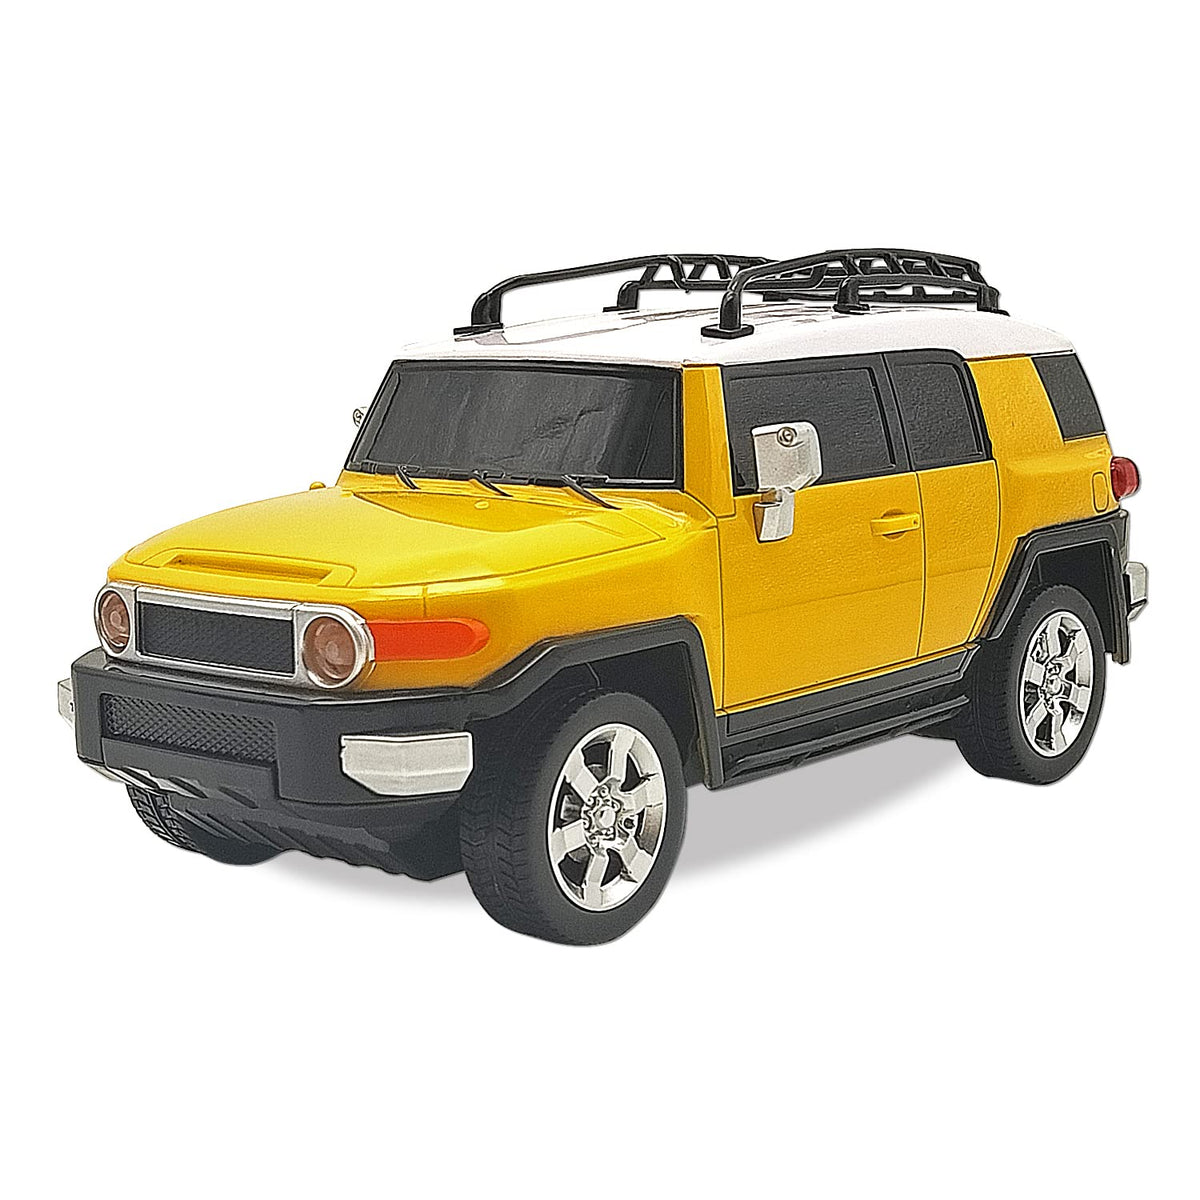 Playzu R/C 1:24 Scale Cruiser Vehicle, Yellow - Remote Control Car for Kids Ages 6+